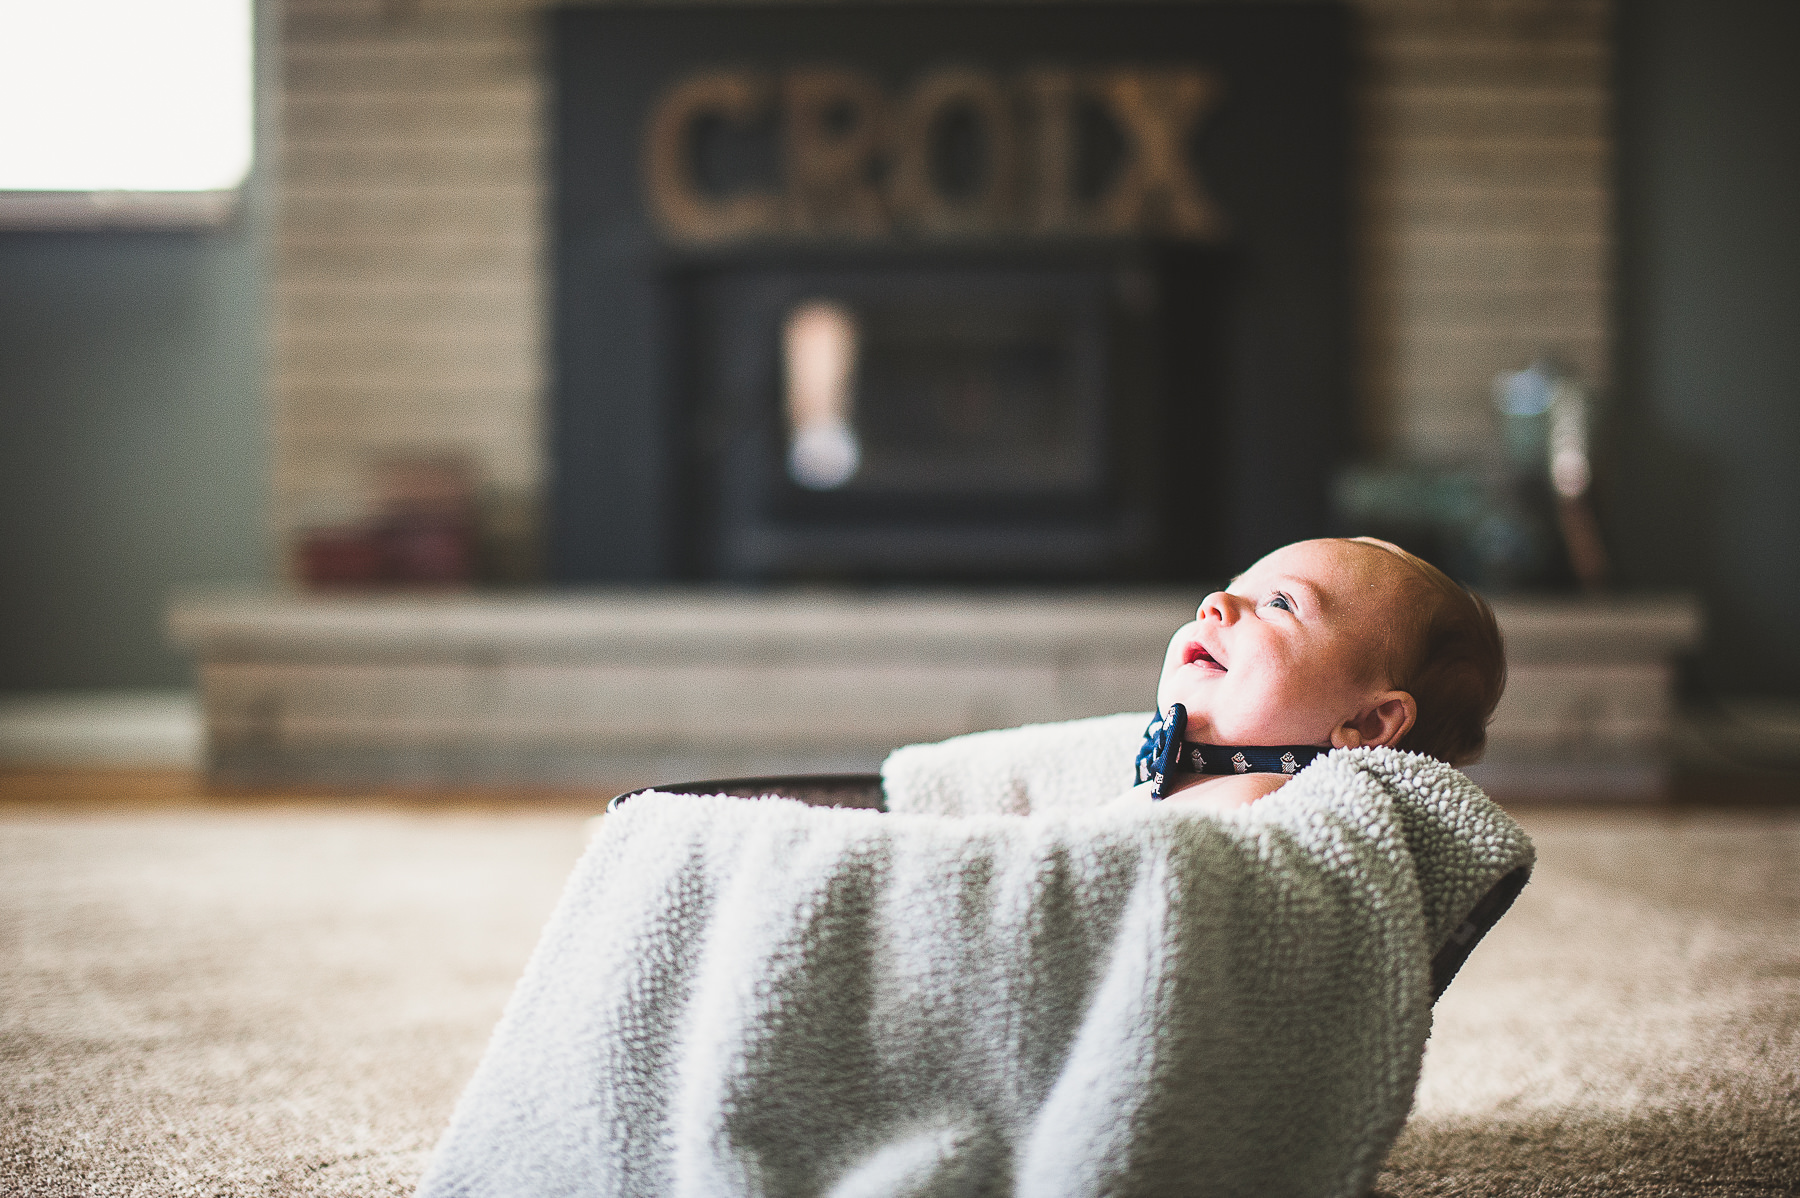 breighton-and-basette-photography-copyrighted-image-blog-croix-newborn-042.jpg